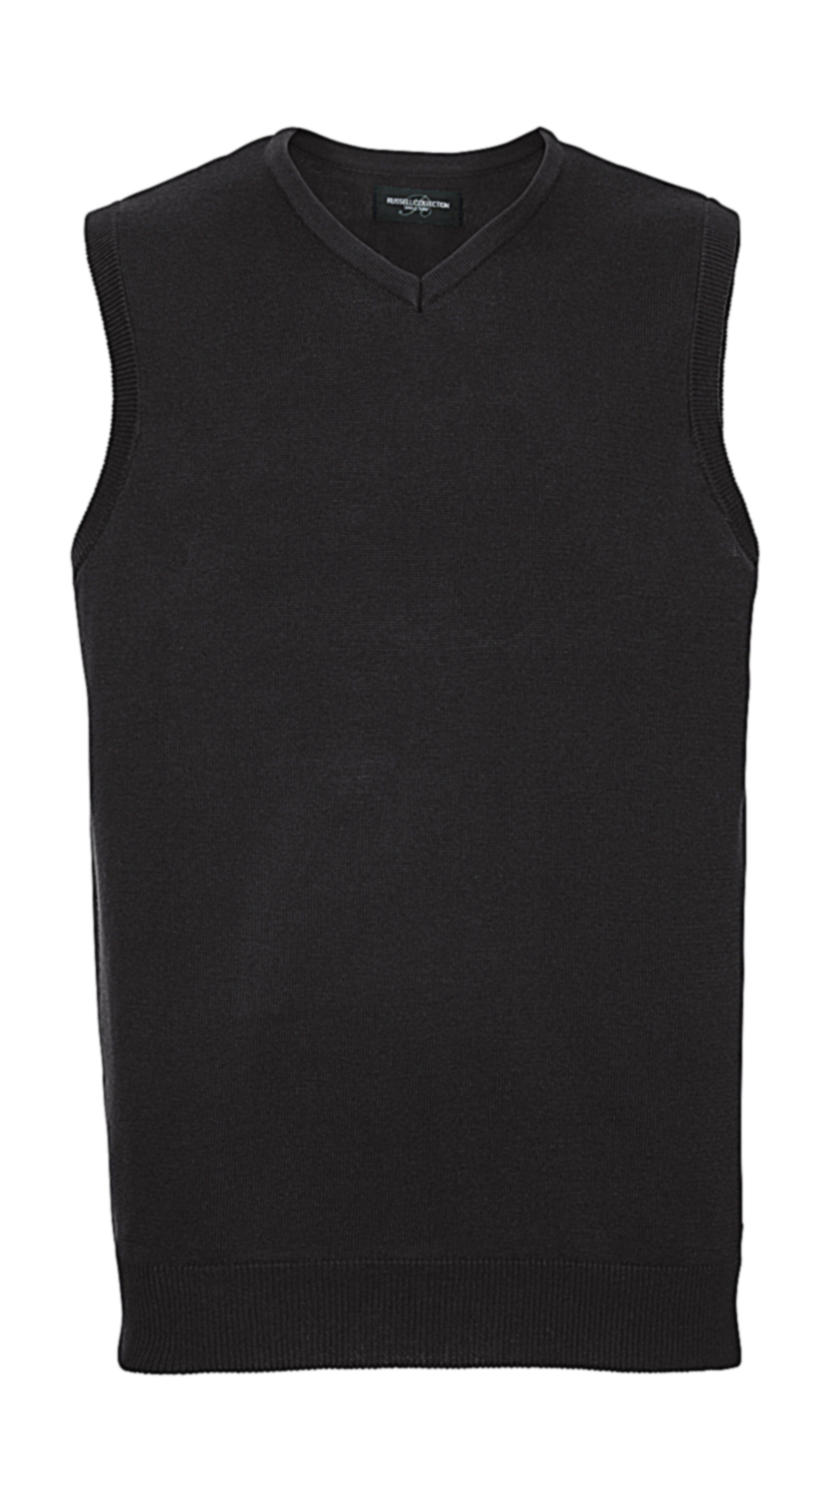  Adults V-Neck Sleeveless Knitted Pullover in Farbe Black